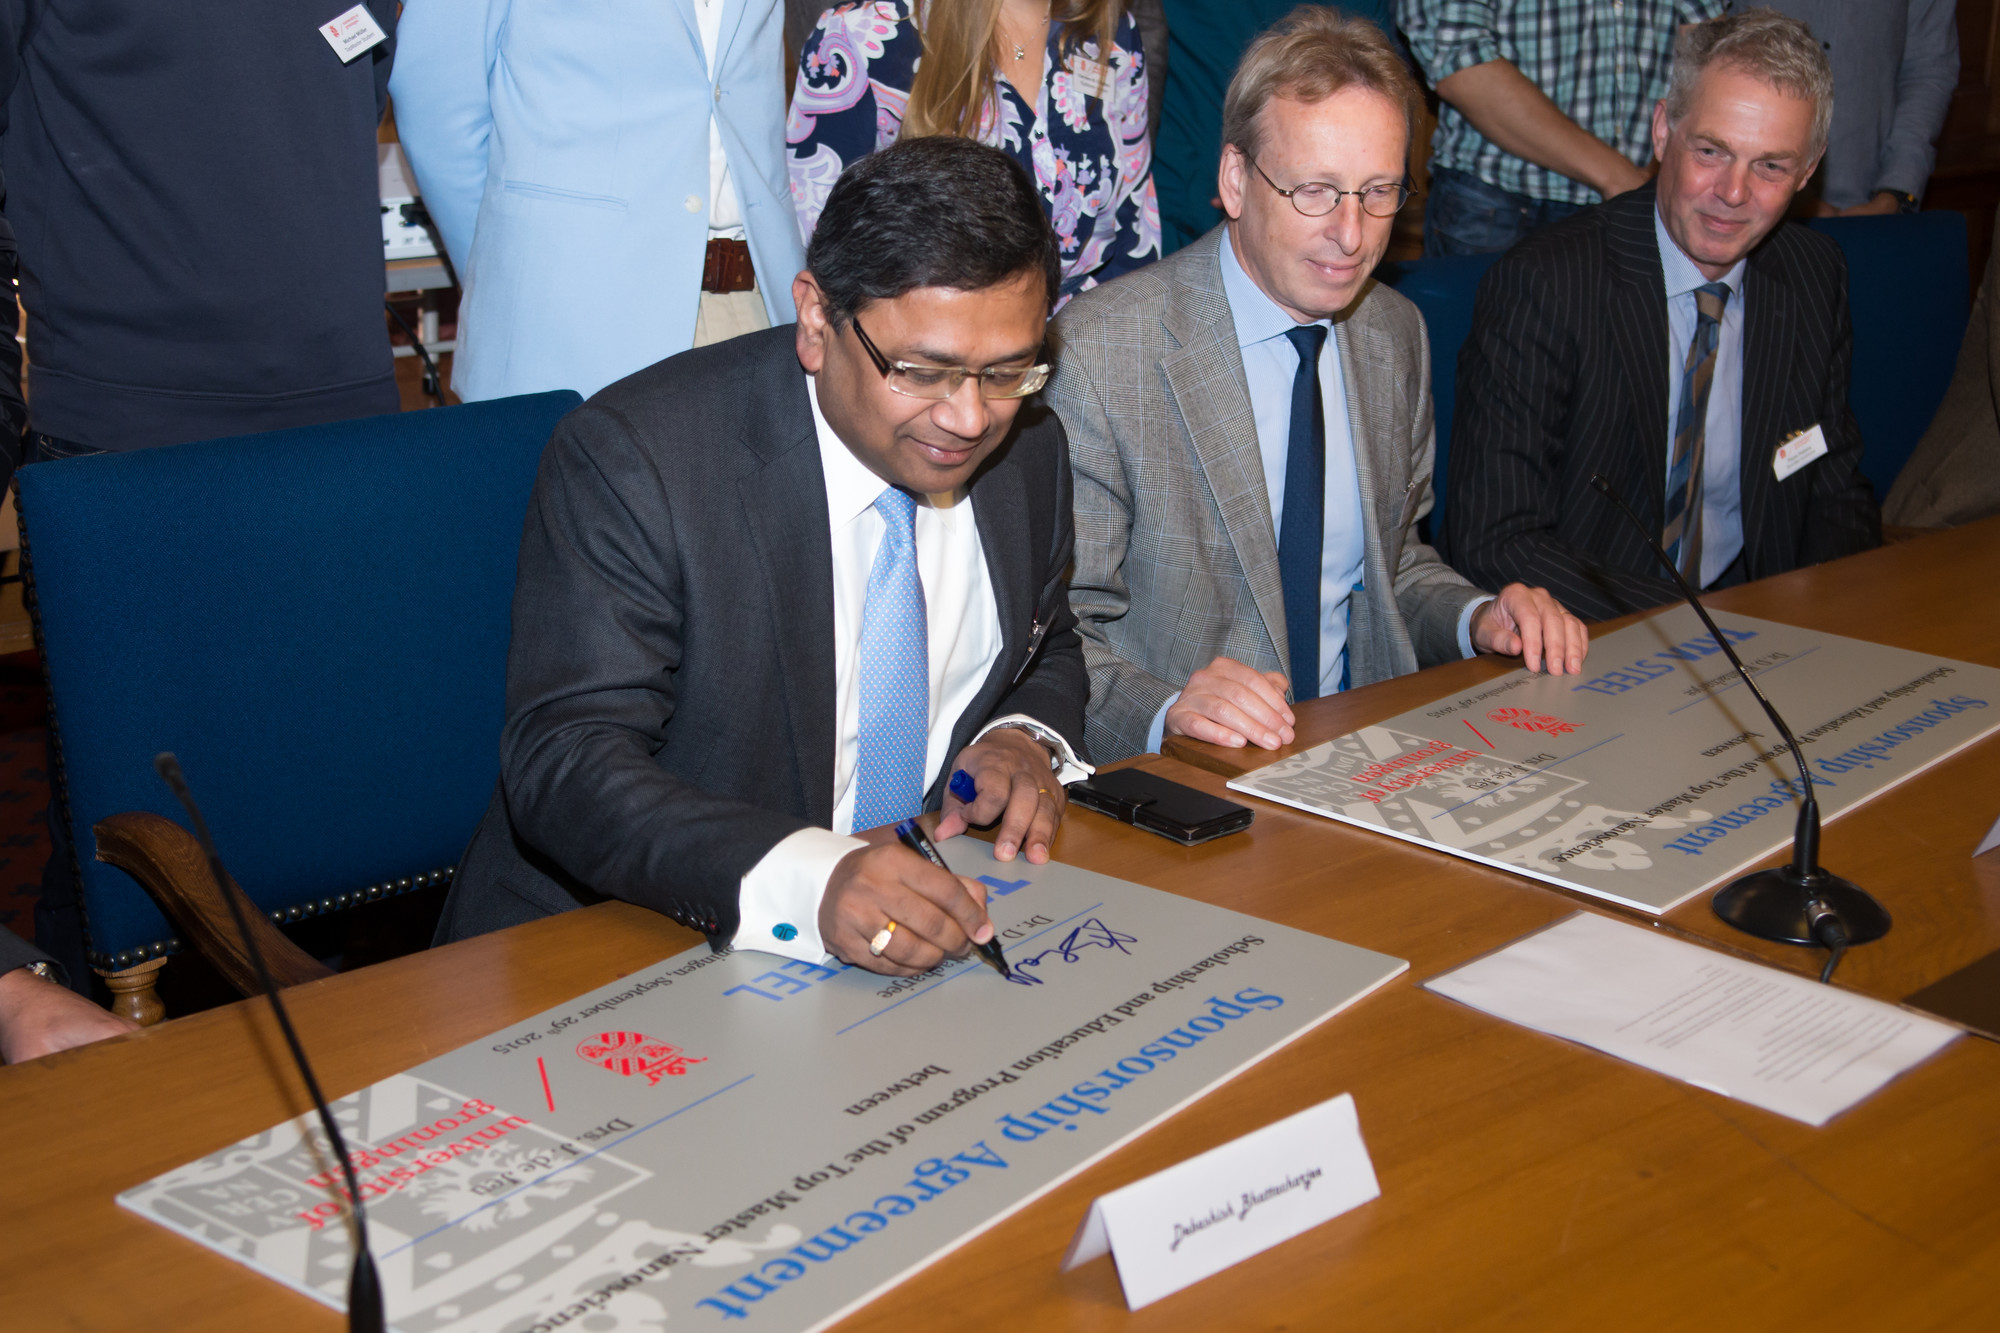 Dr. D. Bhattacharjee from Tata Steel puts his signature